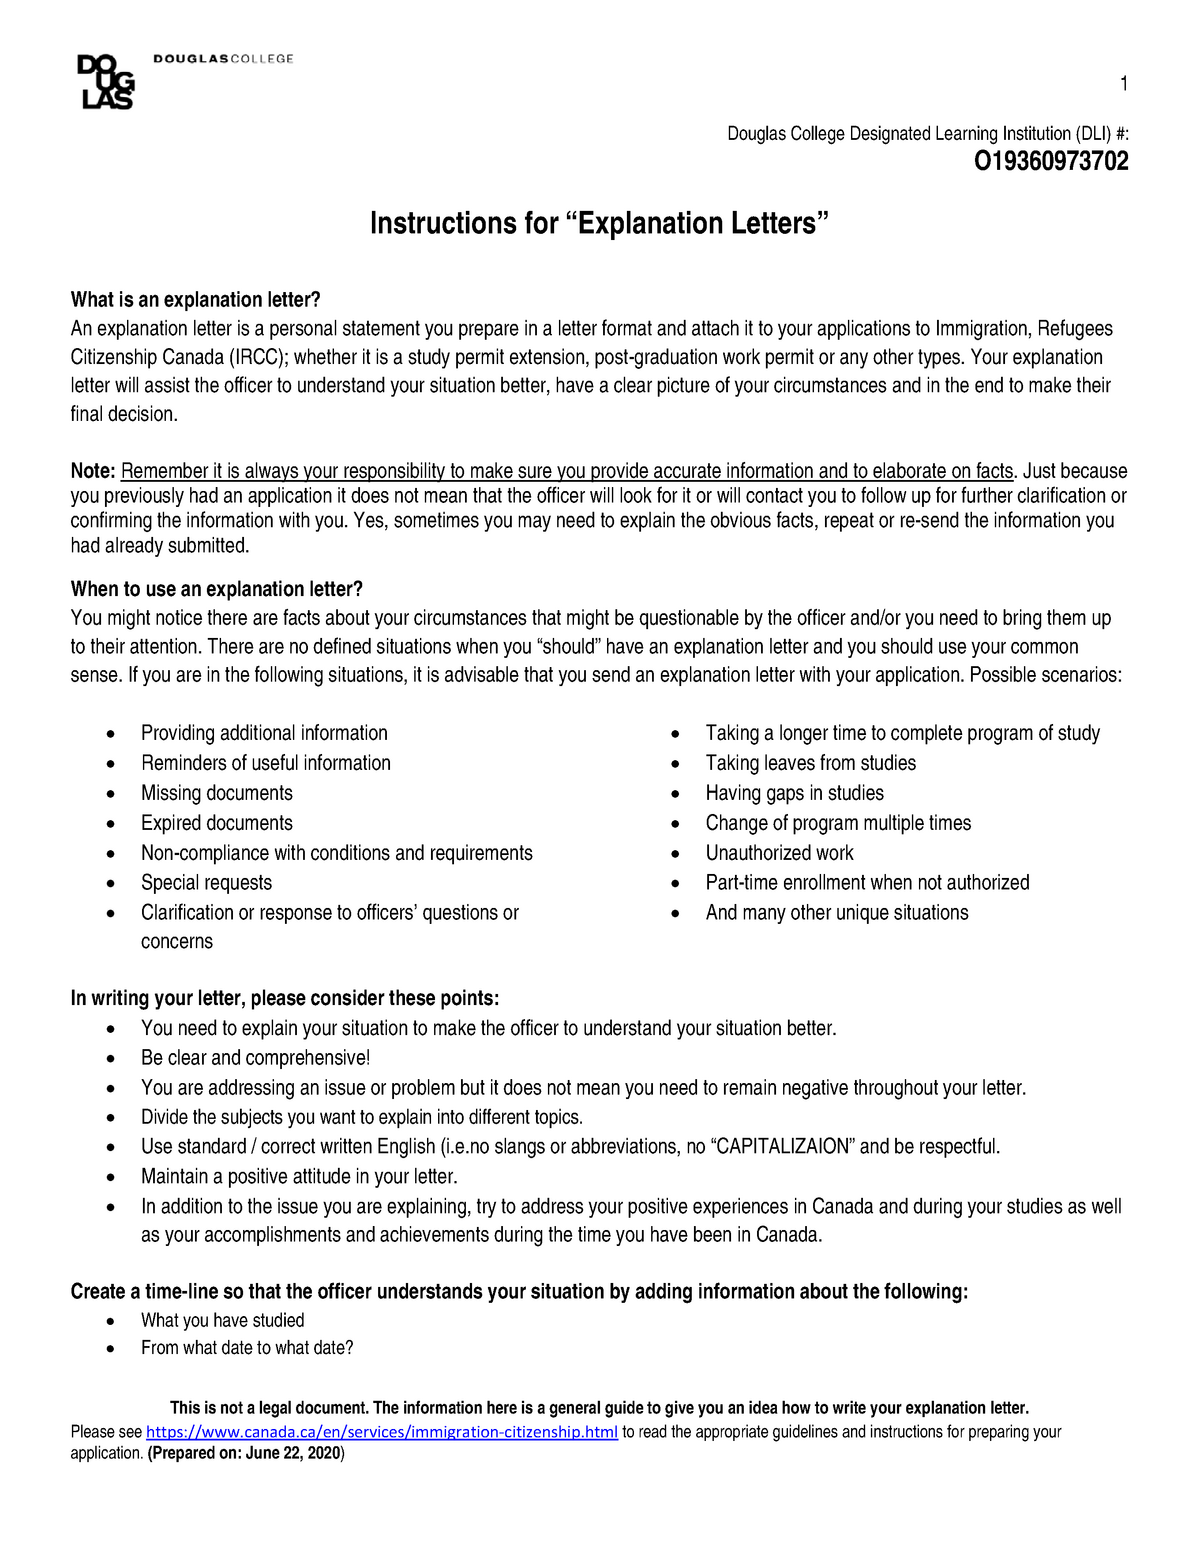 Explanation Letter Template and instructions 1 This is not a legal